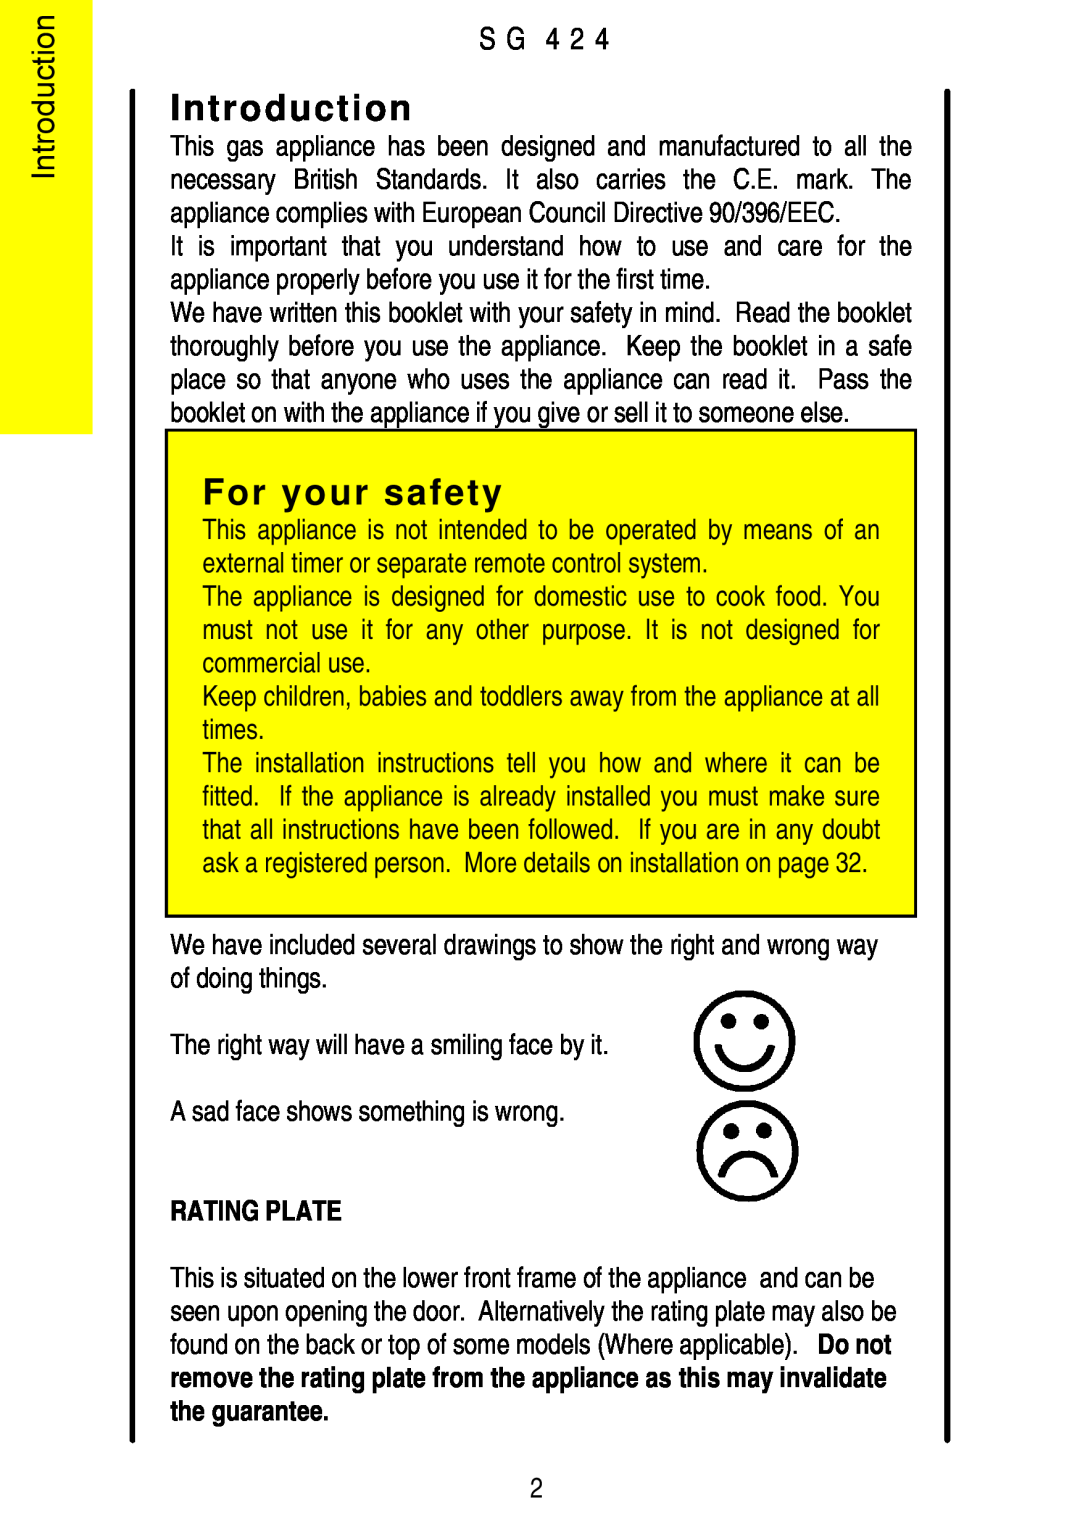 Electrolux SG 424 installation instructions Introduction, For your safety, S G 4 2, Rating Plate 